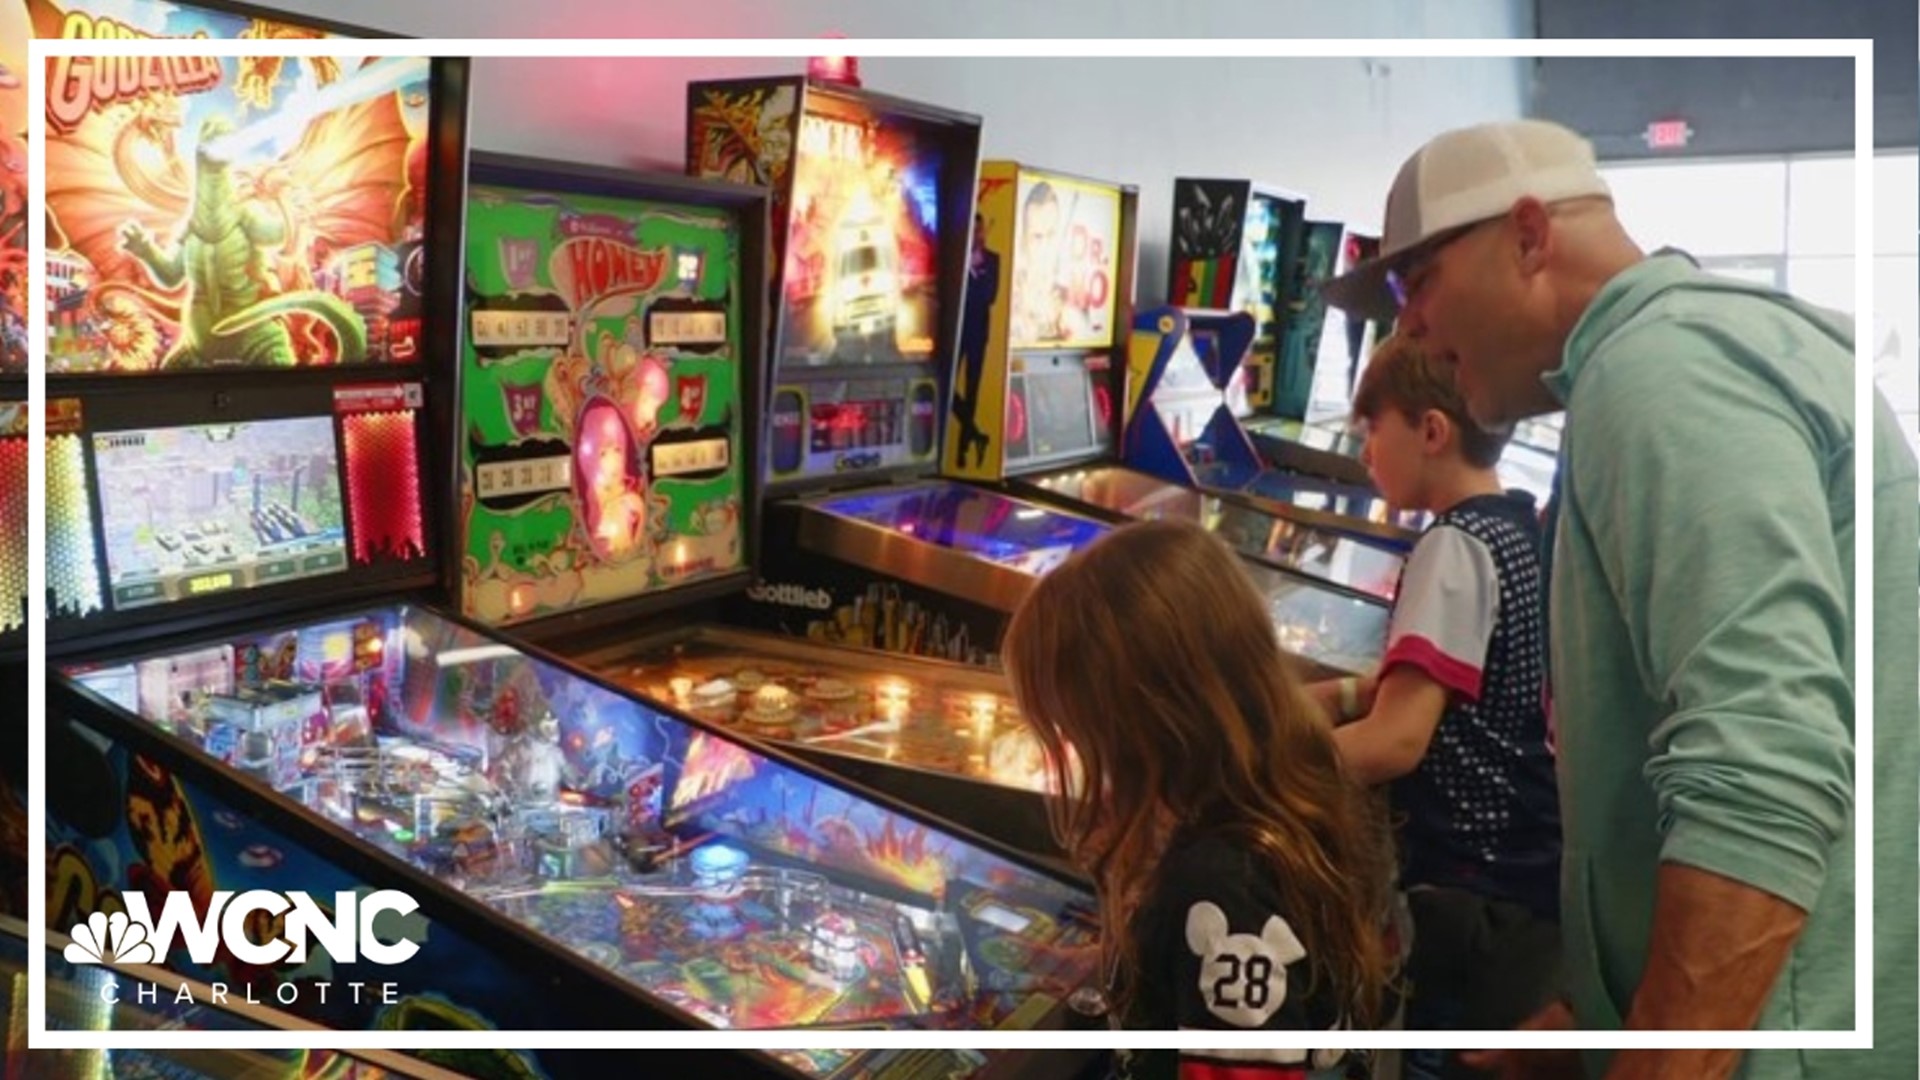 The "classic arcade and pinball museum" just opened in Gastonia, and it's taking families on a trip down memory lane.